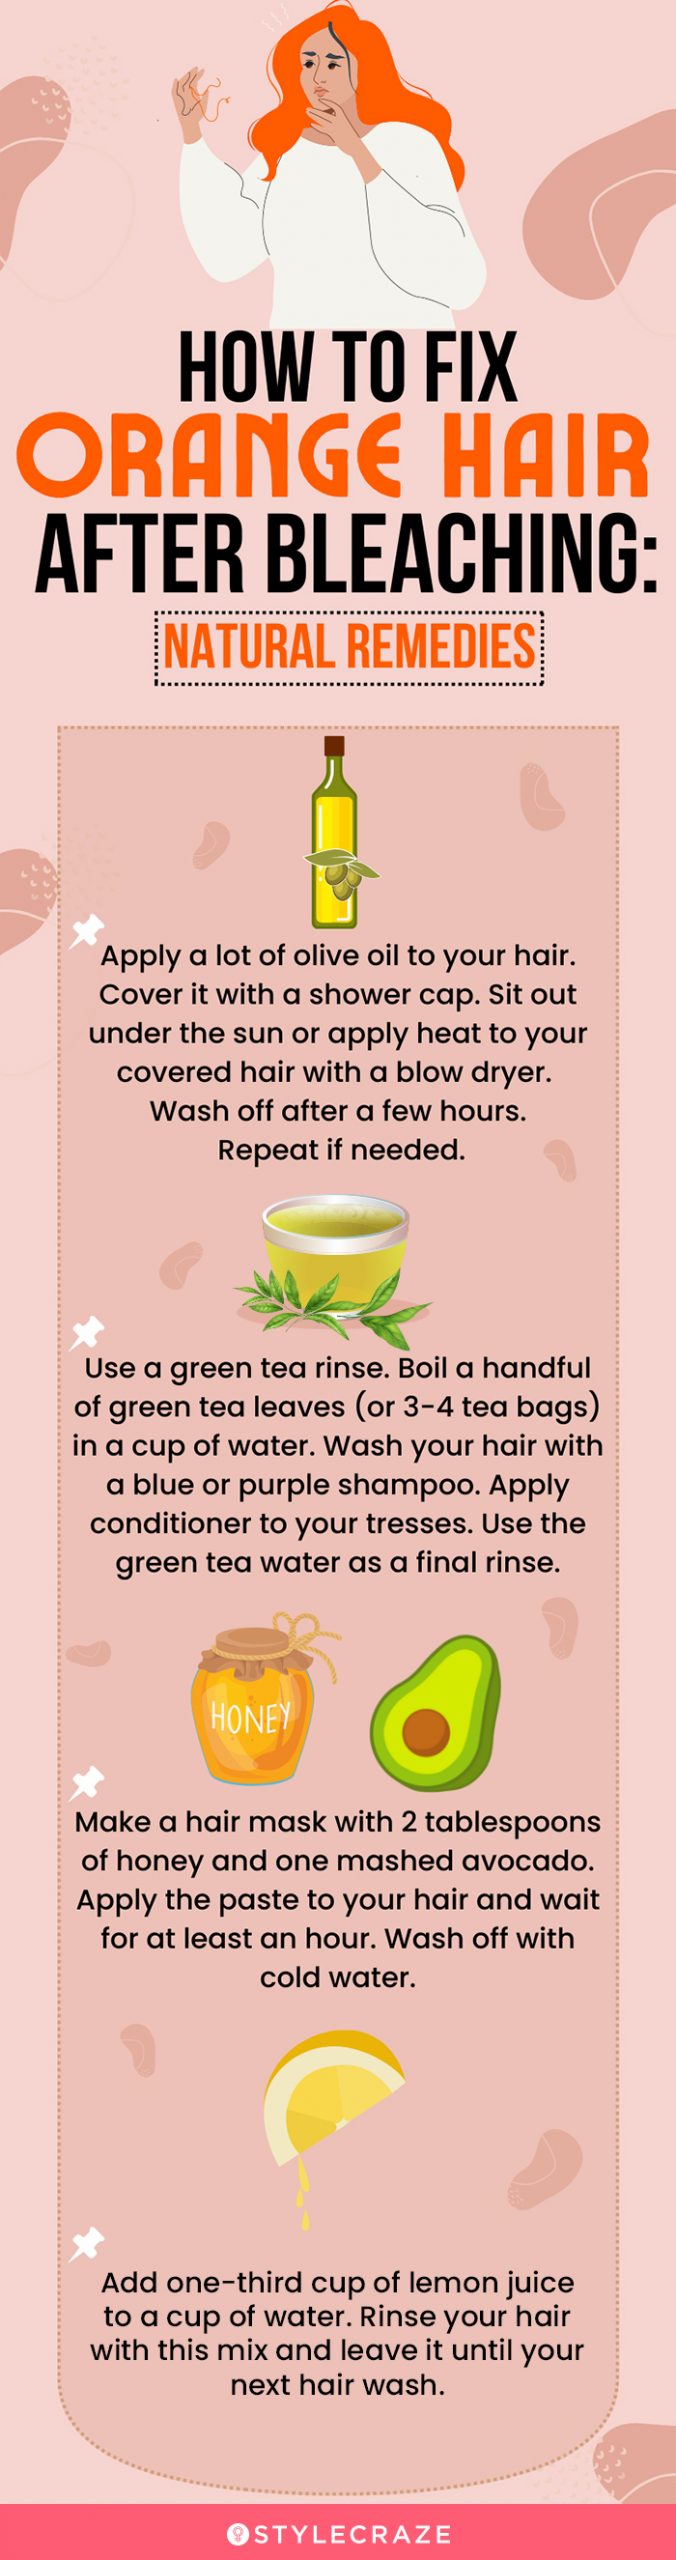 how to fix orange hair after bleaching [infographic]